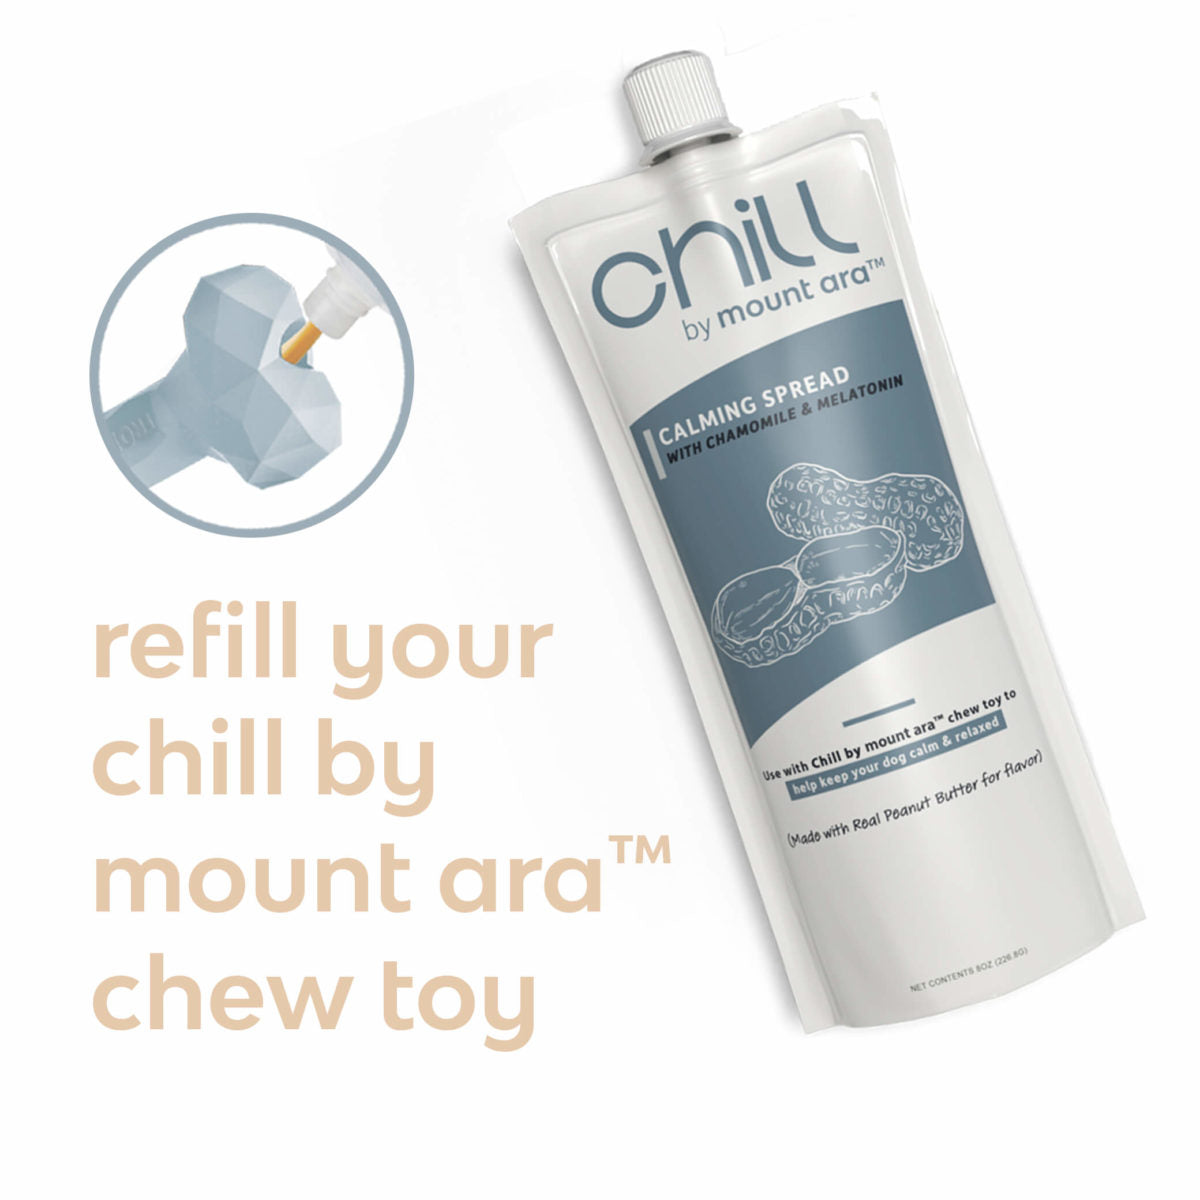 Mount Ara CHILL Calming Peanut Butter Spread For Dogs